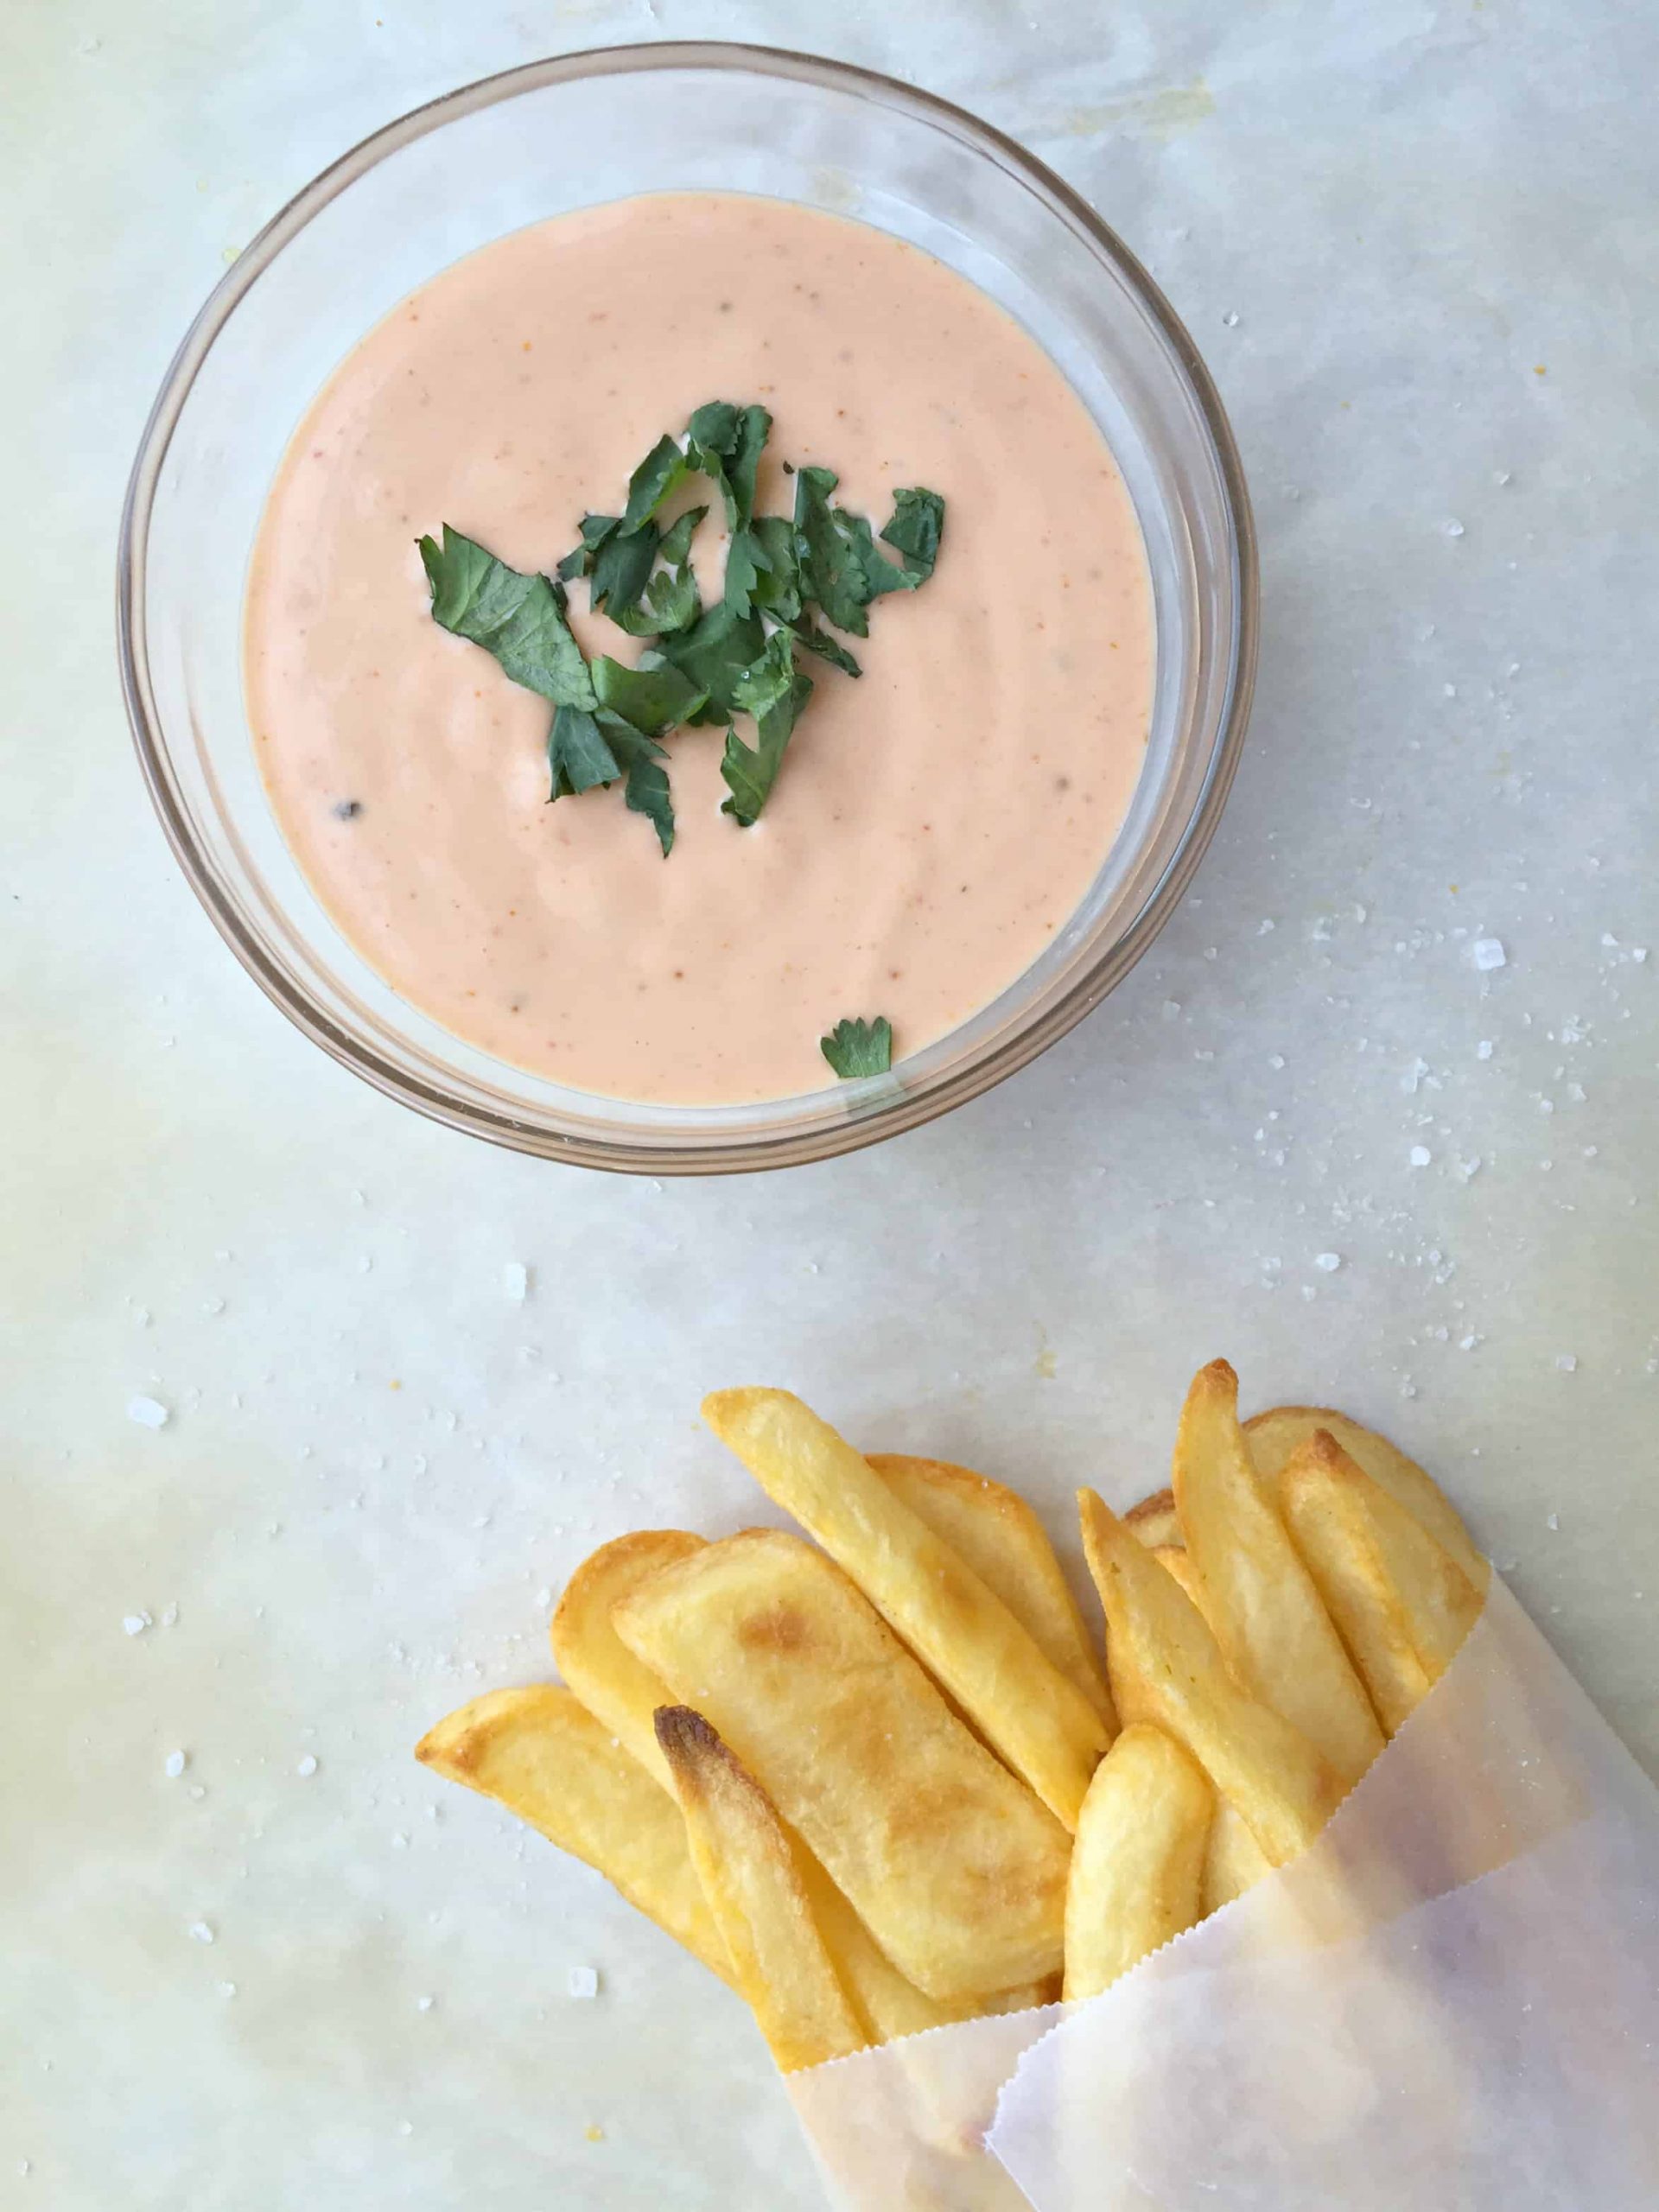 Freddy's popular fry sauce now available in take-home bottles